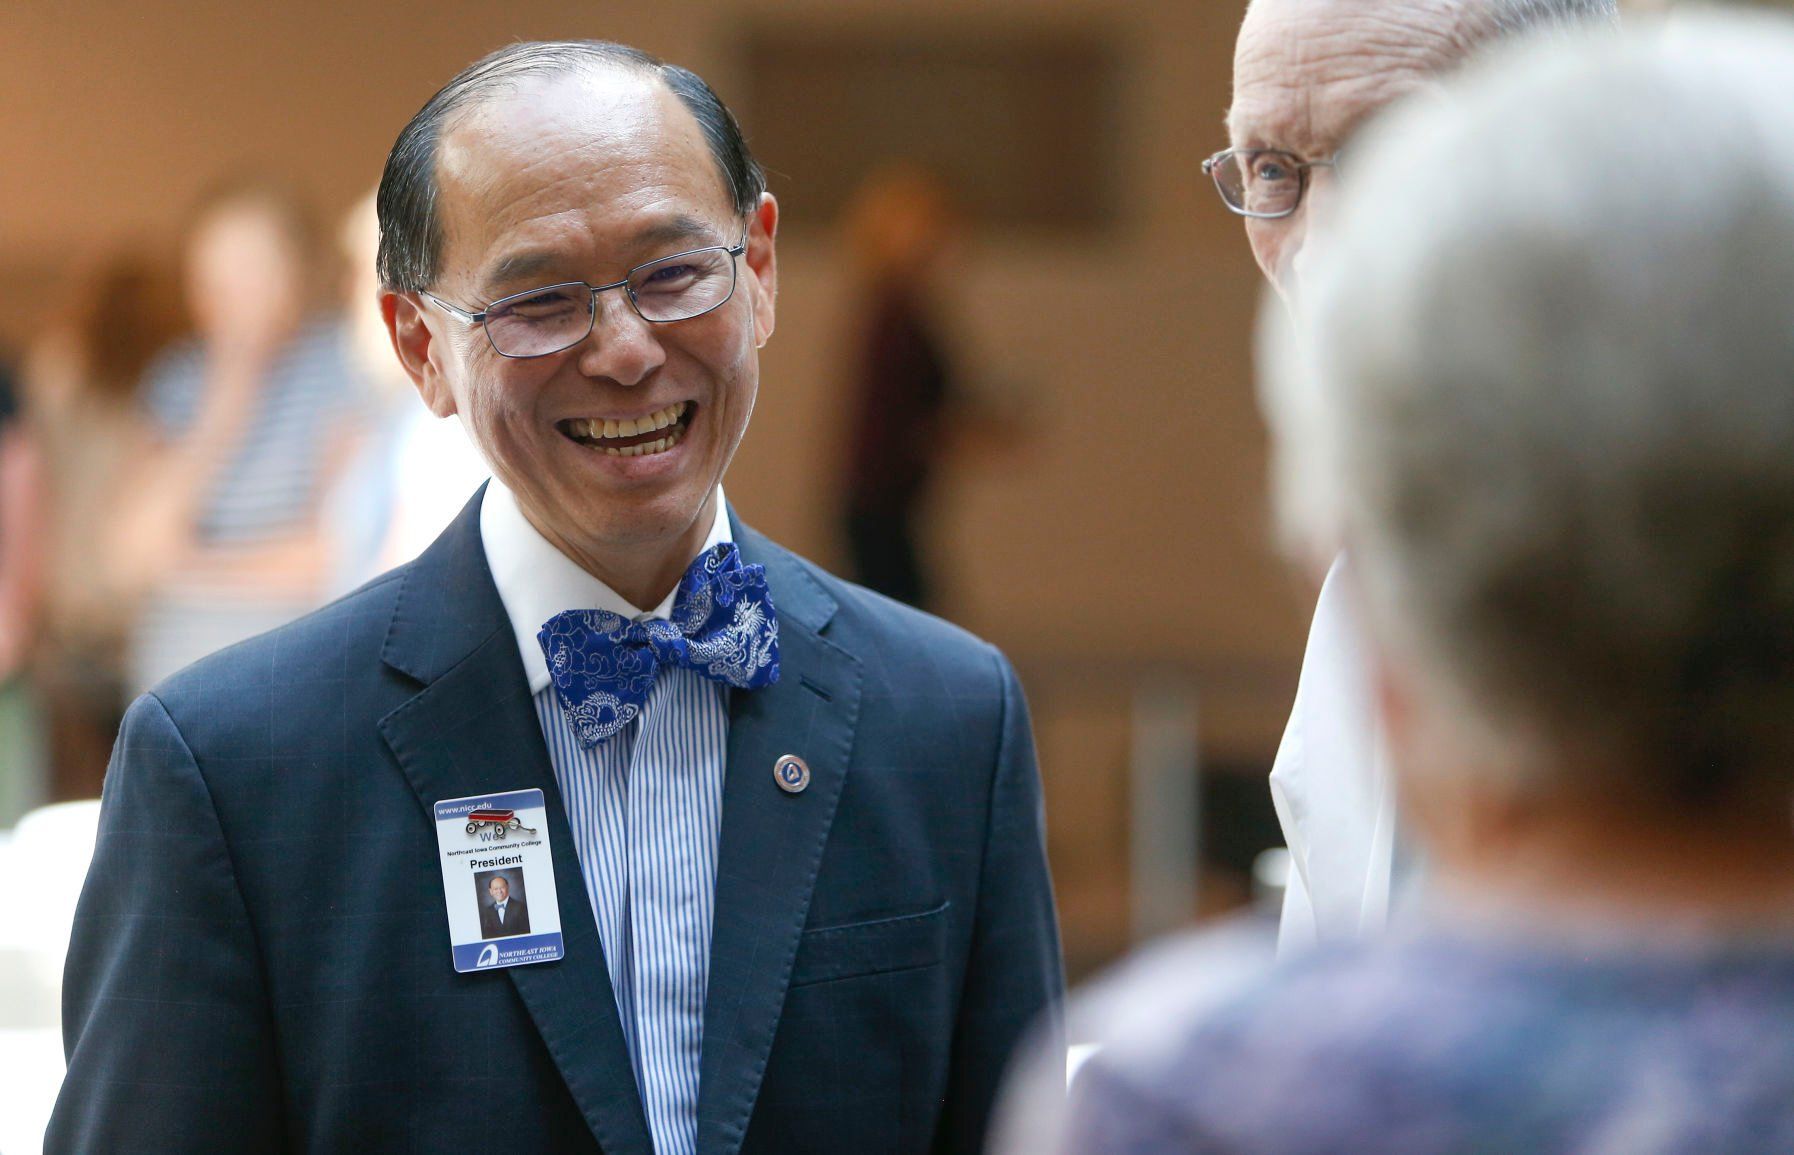 Departing Northeast Iowa Community College President Liang Chee Wee chats with friends during his goodbye ceremony held at the Peosta campus on, Wednesday, June 22, 2022.    PHOTO CREDIT: Dave Kettering